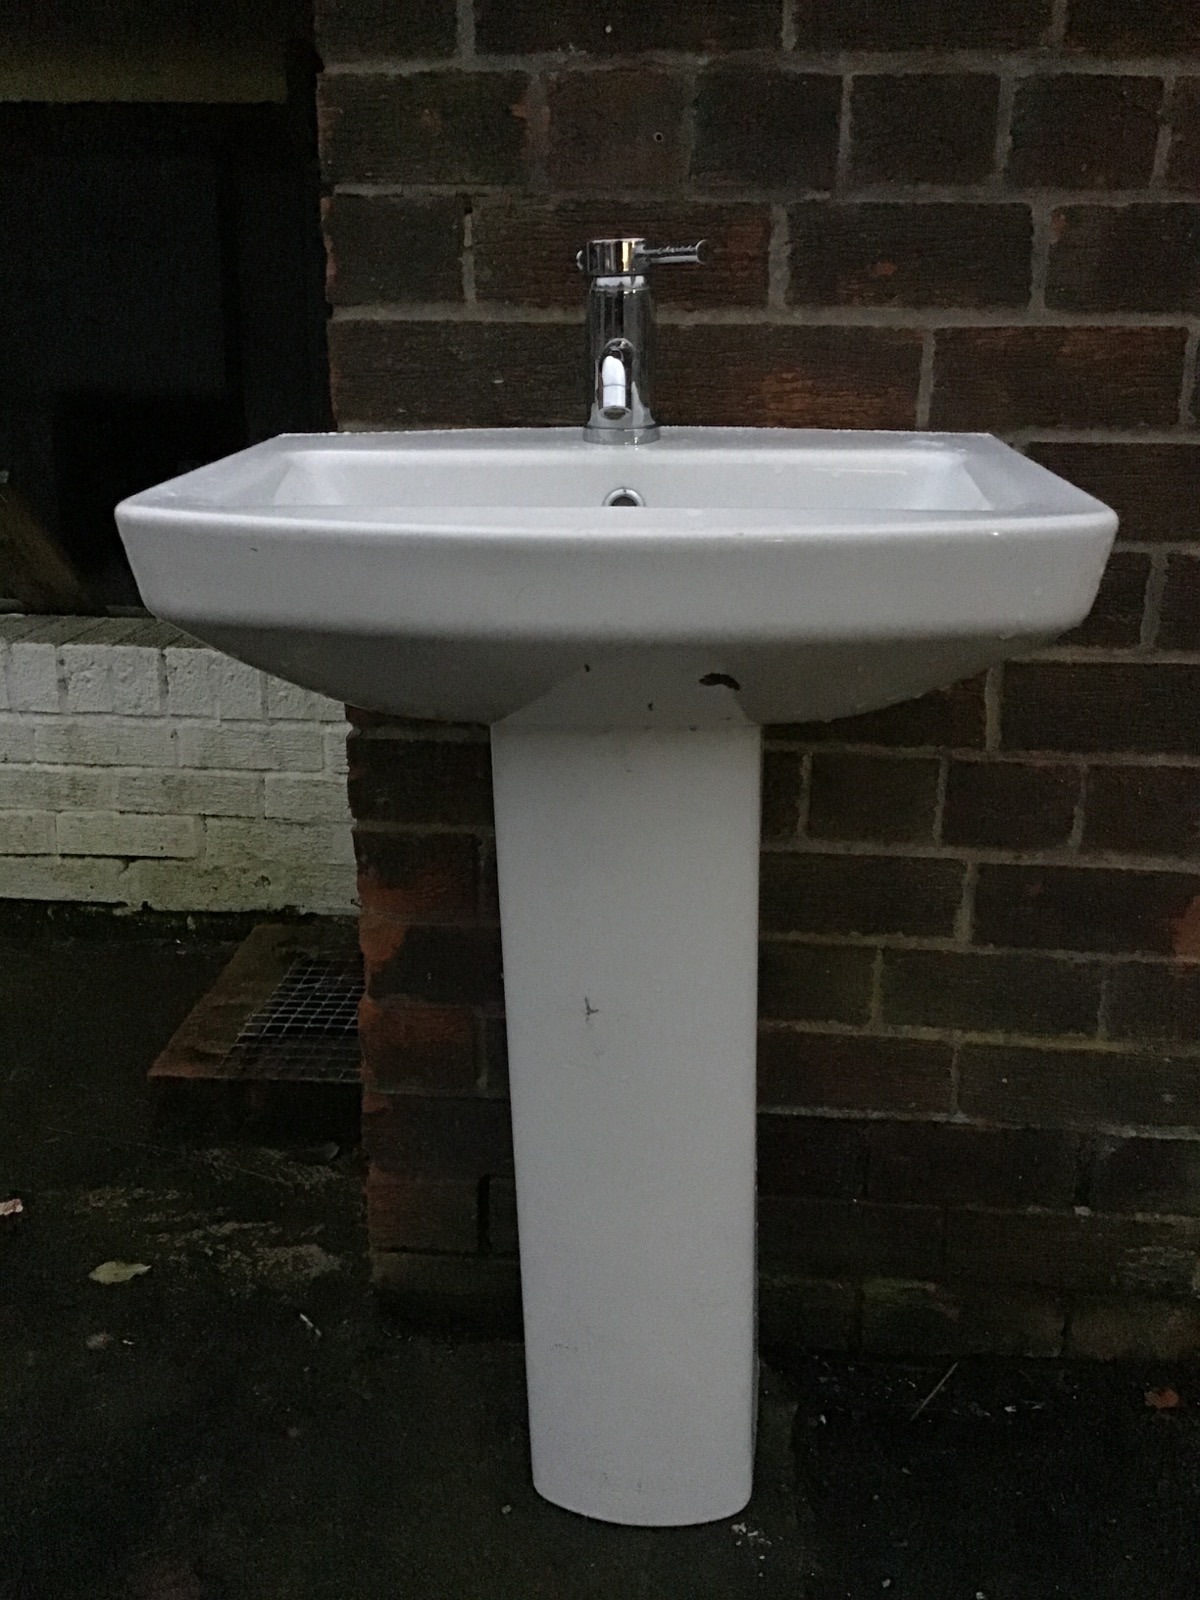 A contemporary ceramic pedestal washbasin with central chromed mixer tap and fittings. (22in x - Image 3 of 3